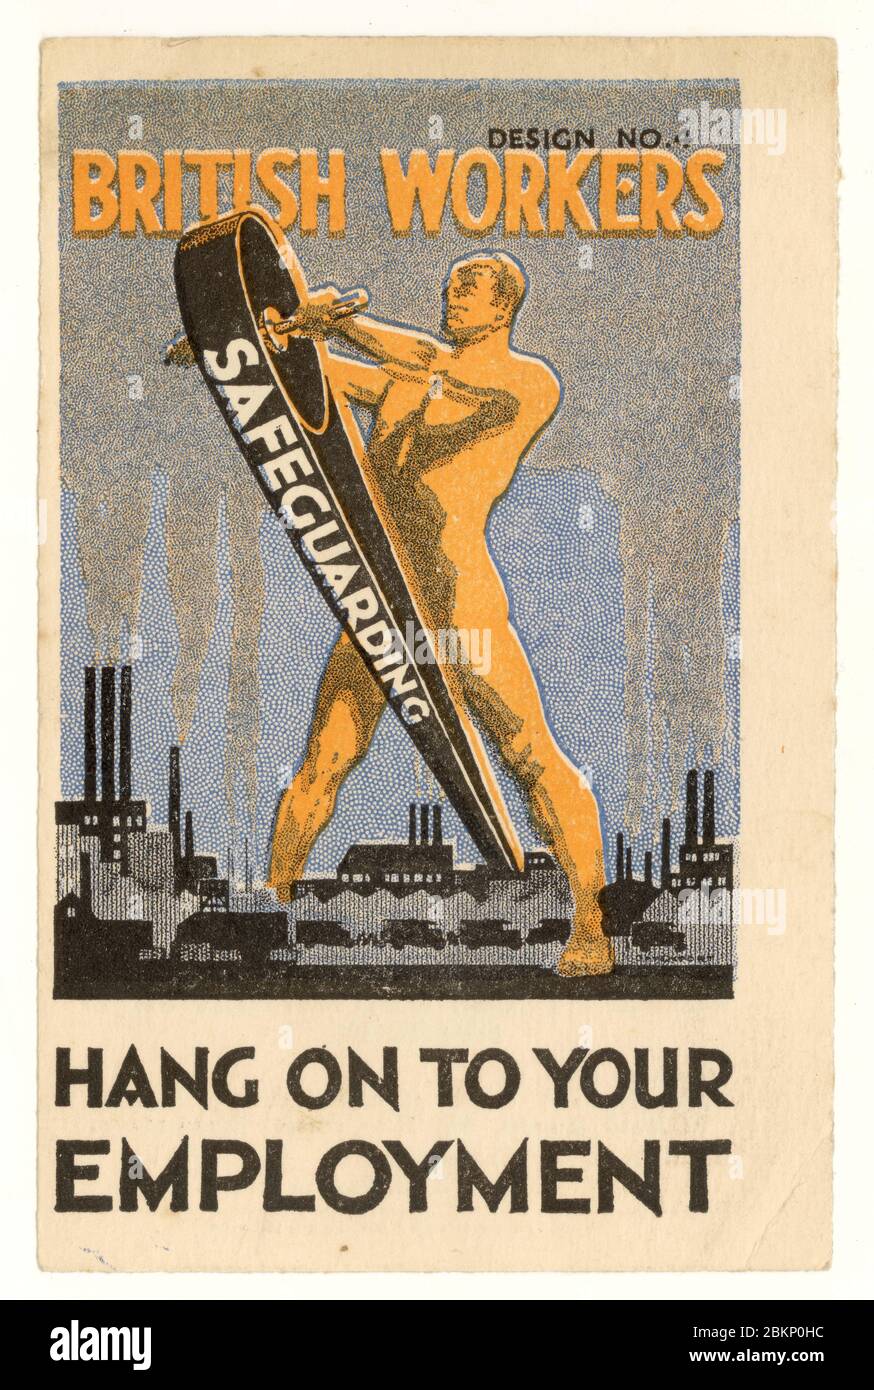 Original, historic, Inter war period leaflet, art deco style, printed by the National Union of Manufacturers urging British Workers to hang onto their employment by supporting those who support the safeguarding of industry (protectionist policies) 'Safeguarding of industry means safeguarding of  employment' it states on the reverse.  As an example of safeguarding, it gives the British  tyre manufacturing industry which was safeguarded and employed many British workers. Printed in Birmingham, U.K. around the time of the financial crash and subsequent Great Depression, circa 1929-1932 . Stock Photo